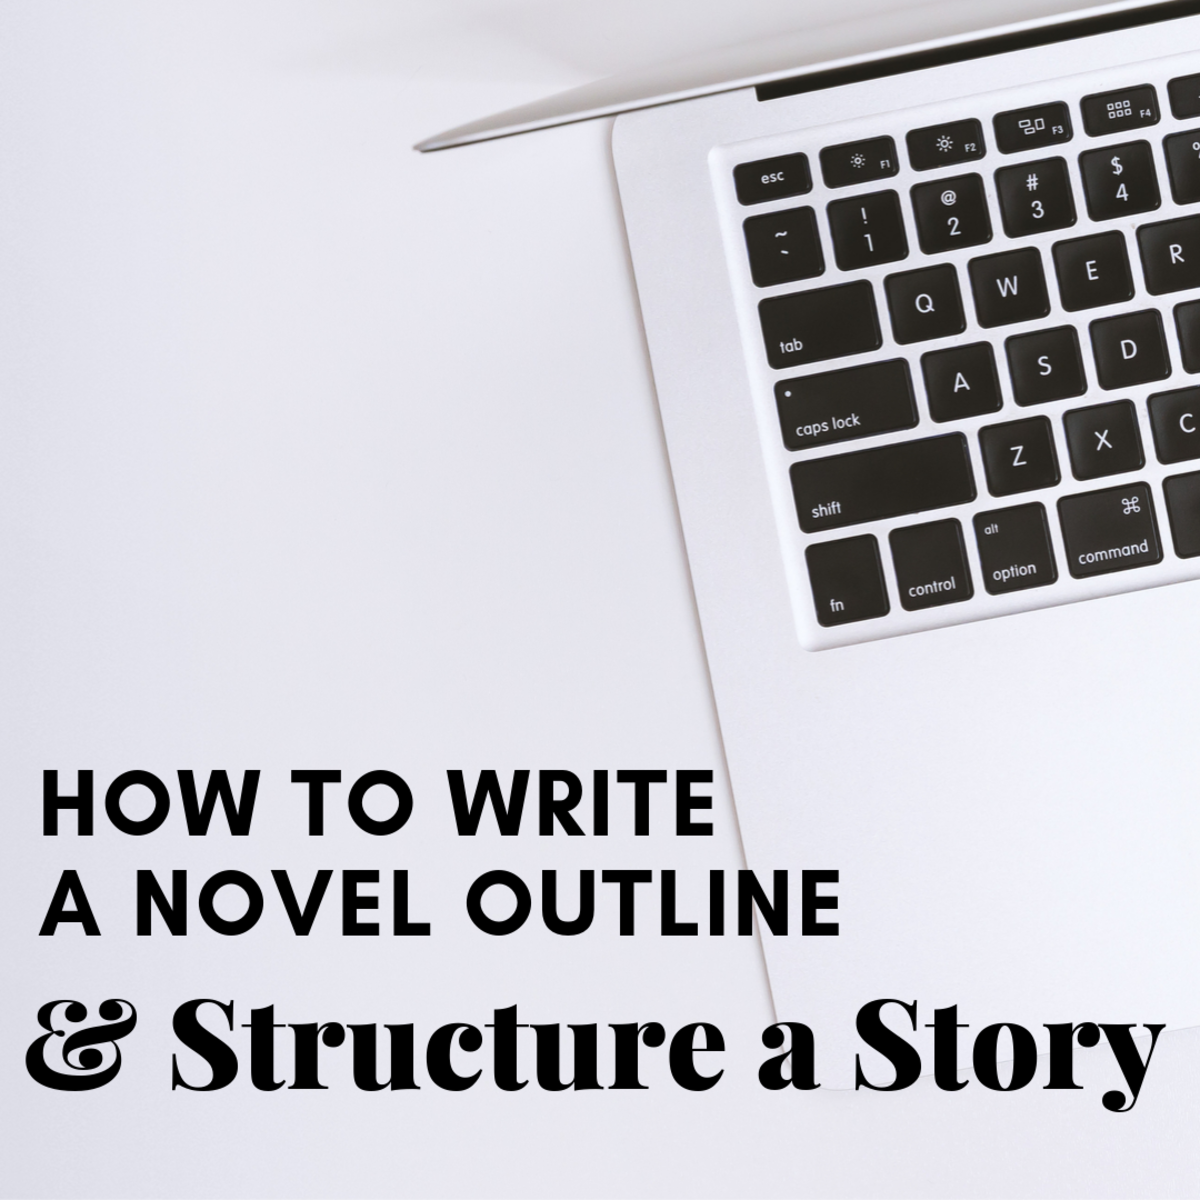 How to Write a Novel Outline and Structure a Story